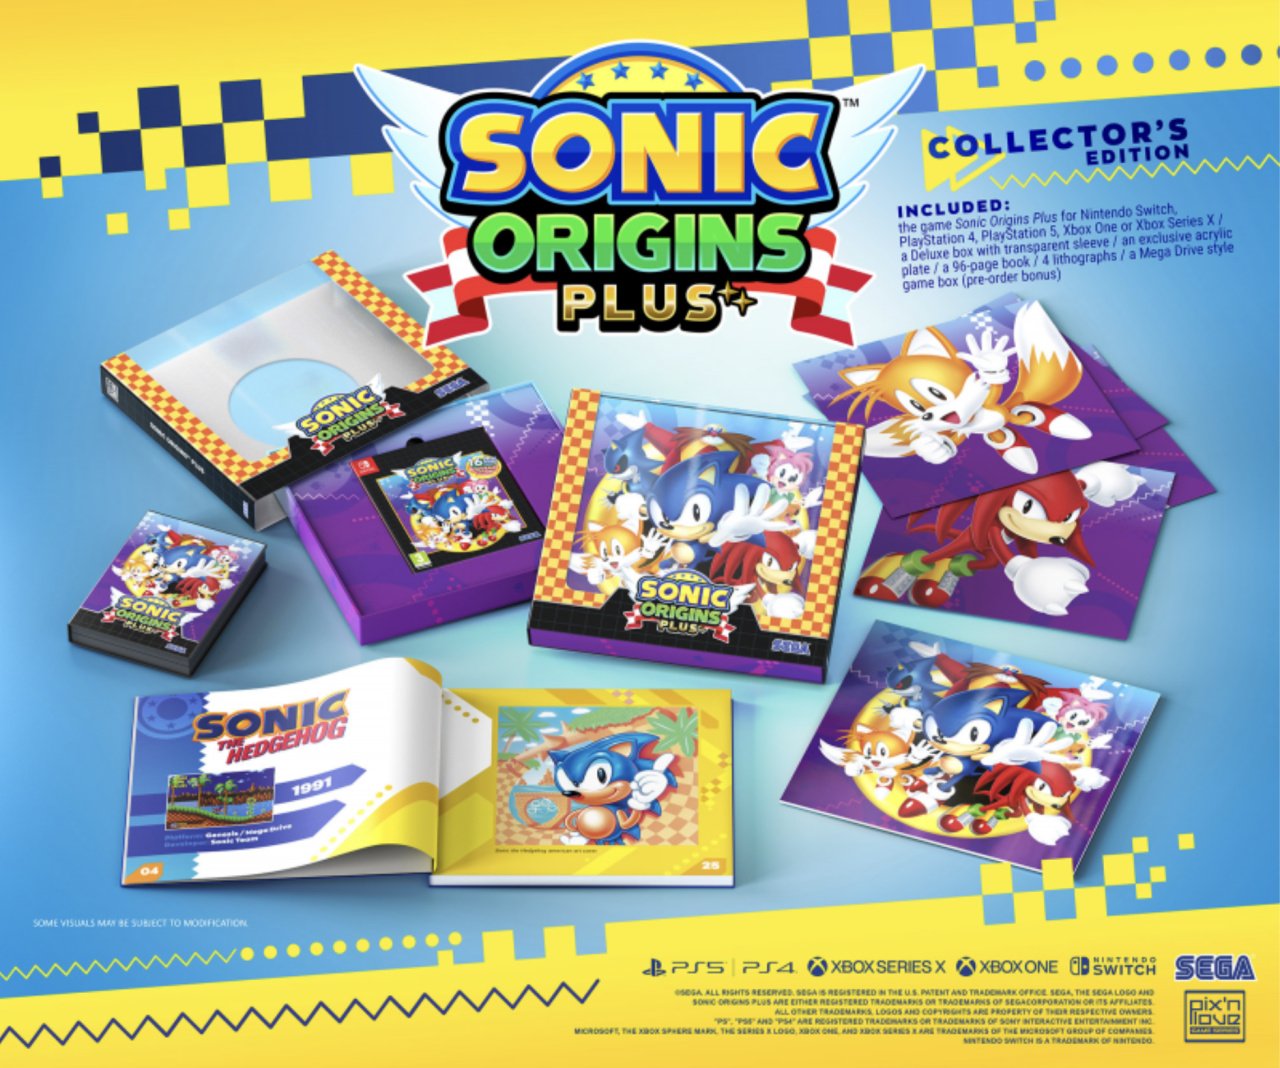 Sonic Origins Plus physical's extra content won't be on cartridge